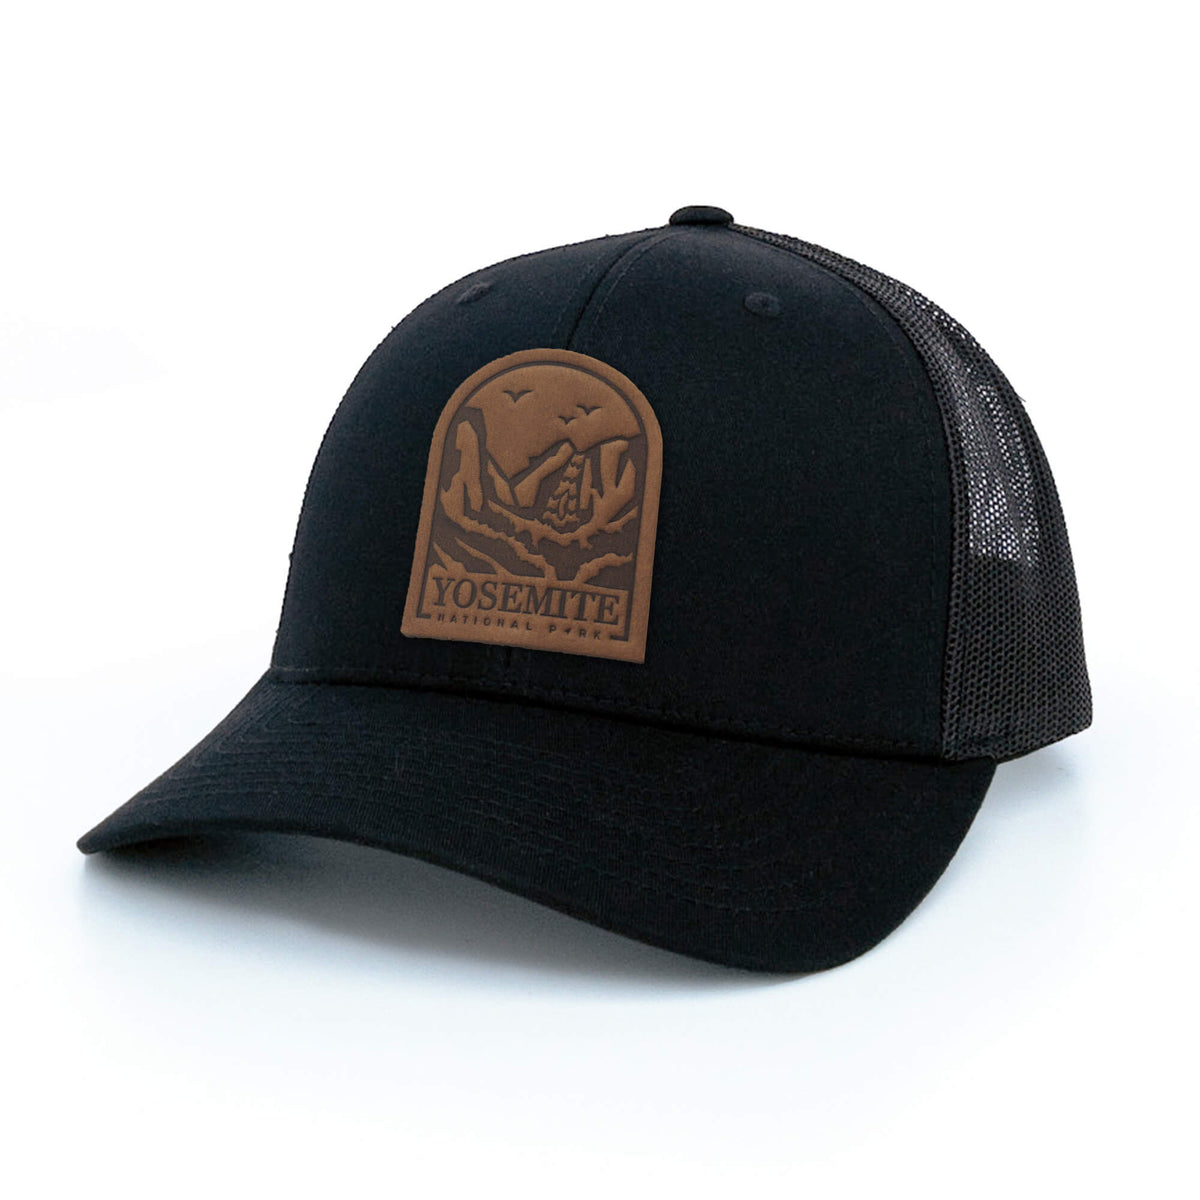 Black trucker hat with full-grain leather patch of Yosemite National Park | BLACK-007-002, CHARC-007-002, NAVY-007-002, HGREY-007-002, MOSS-007-002, BROWN-007-002